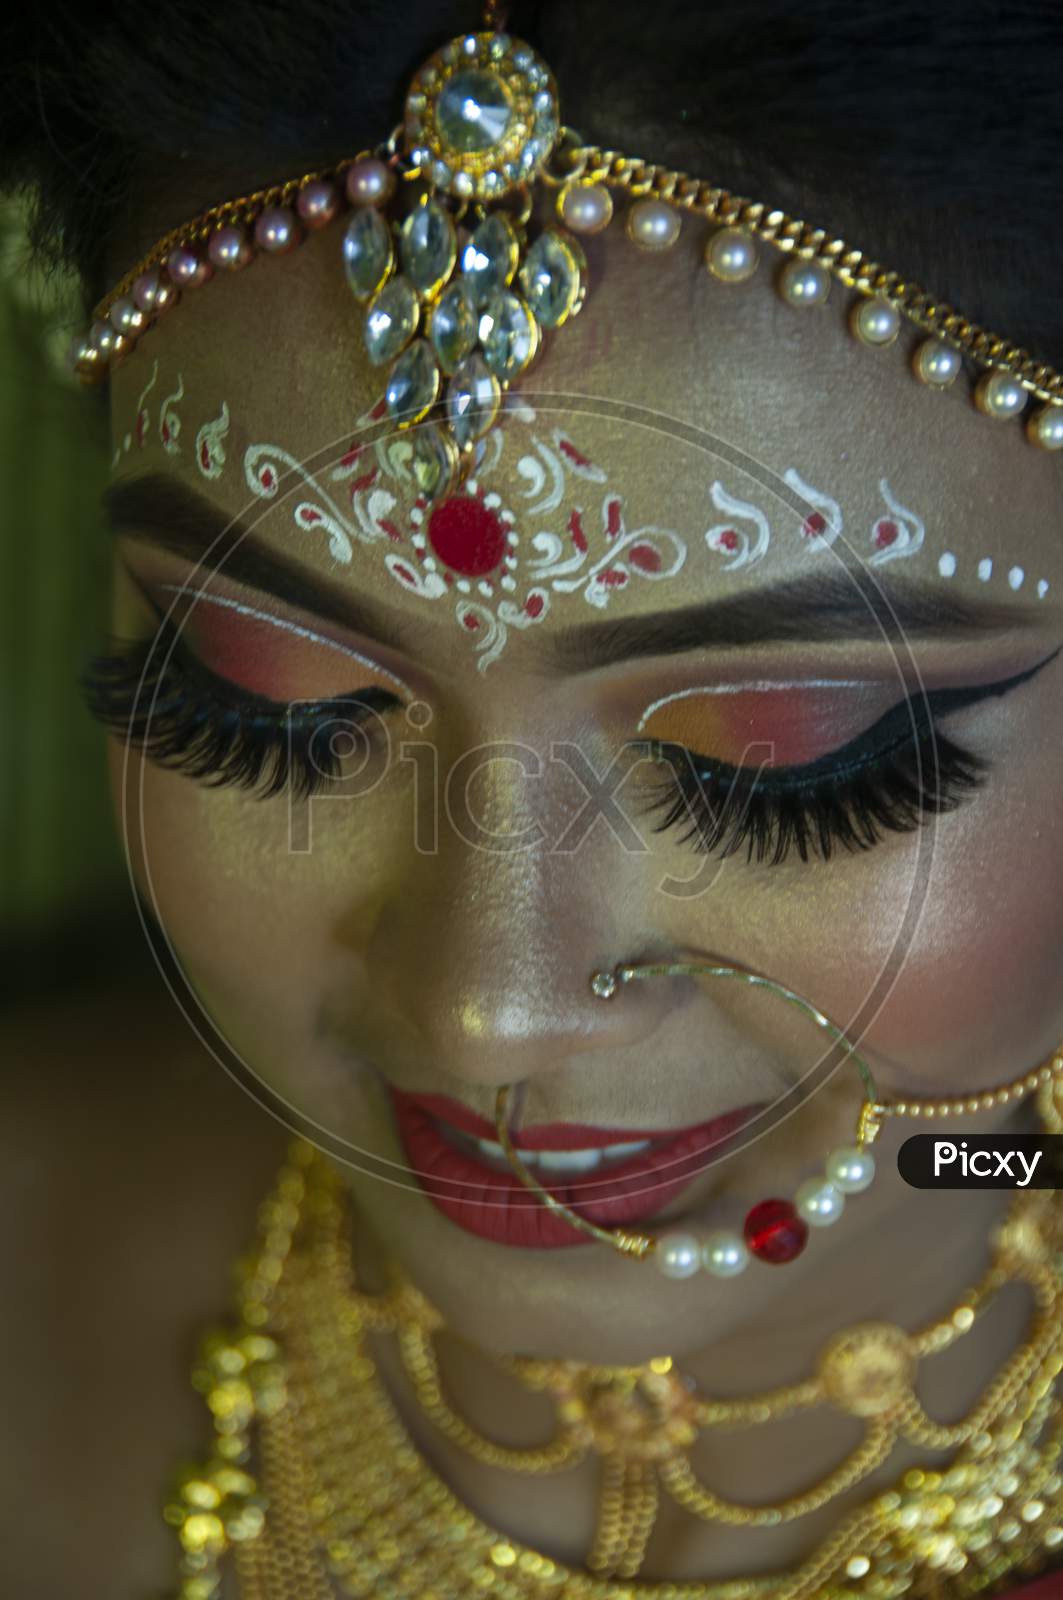 A Girl In Her Marriage Day Showing Her Eye Makeup